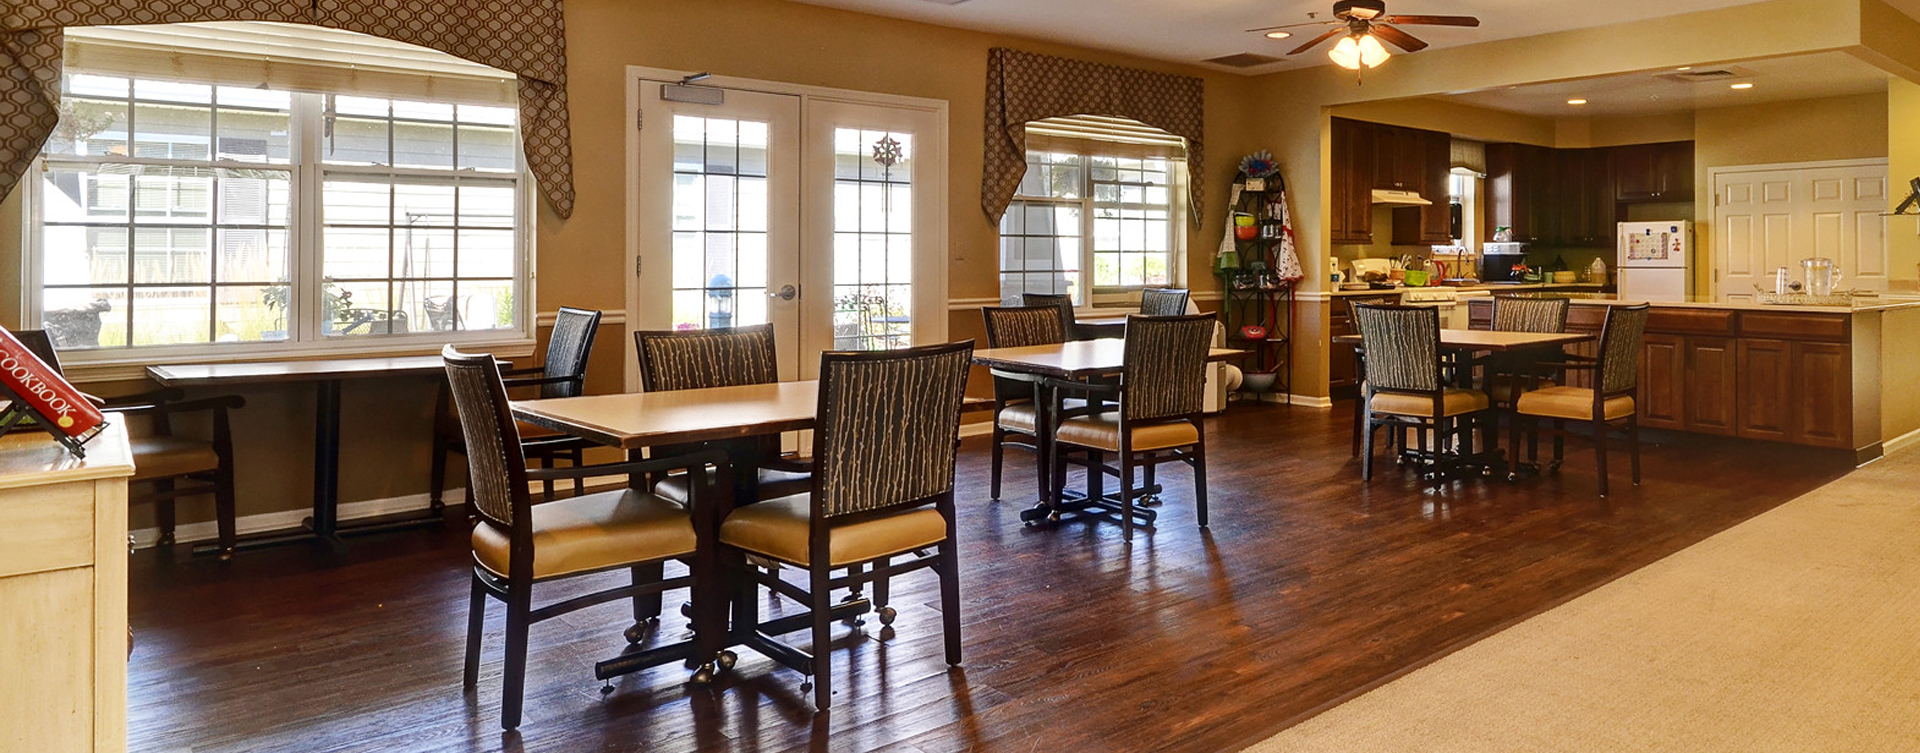 Mary B’s country kitchen evokes a sense of home and reconnects residents to past life skills at Bickford of Crystal Lake